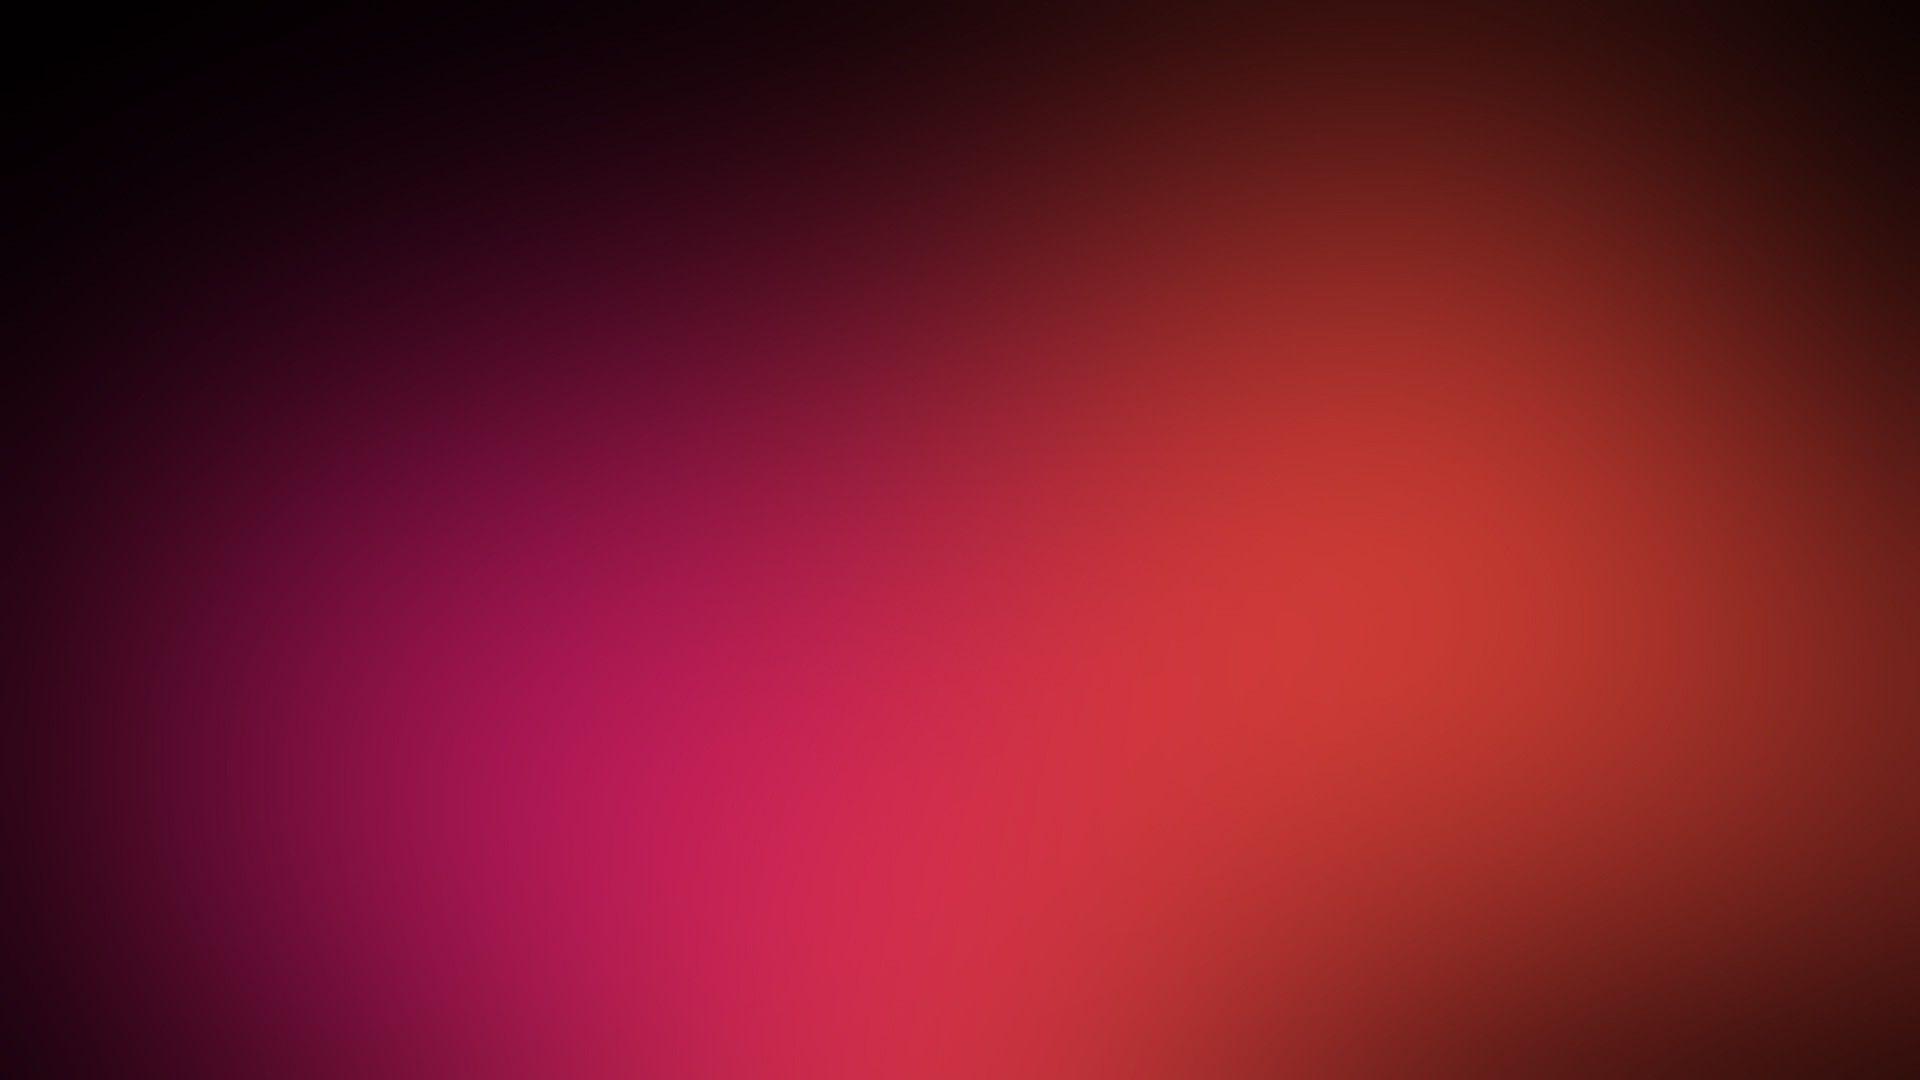 red and pink combination background